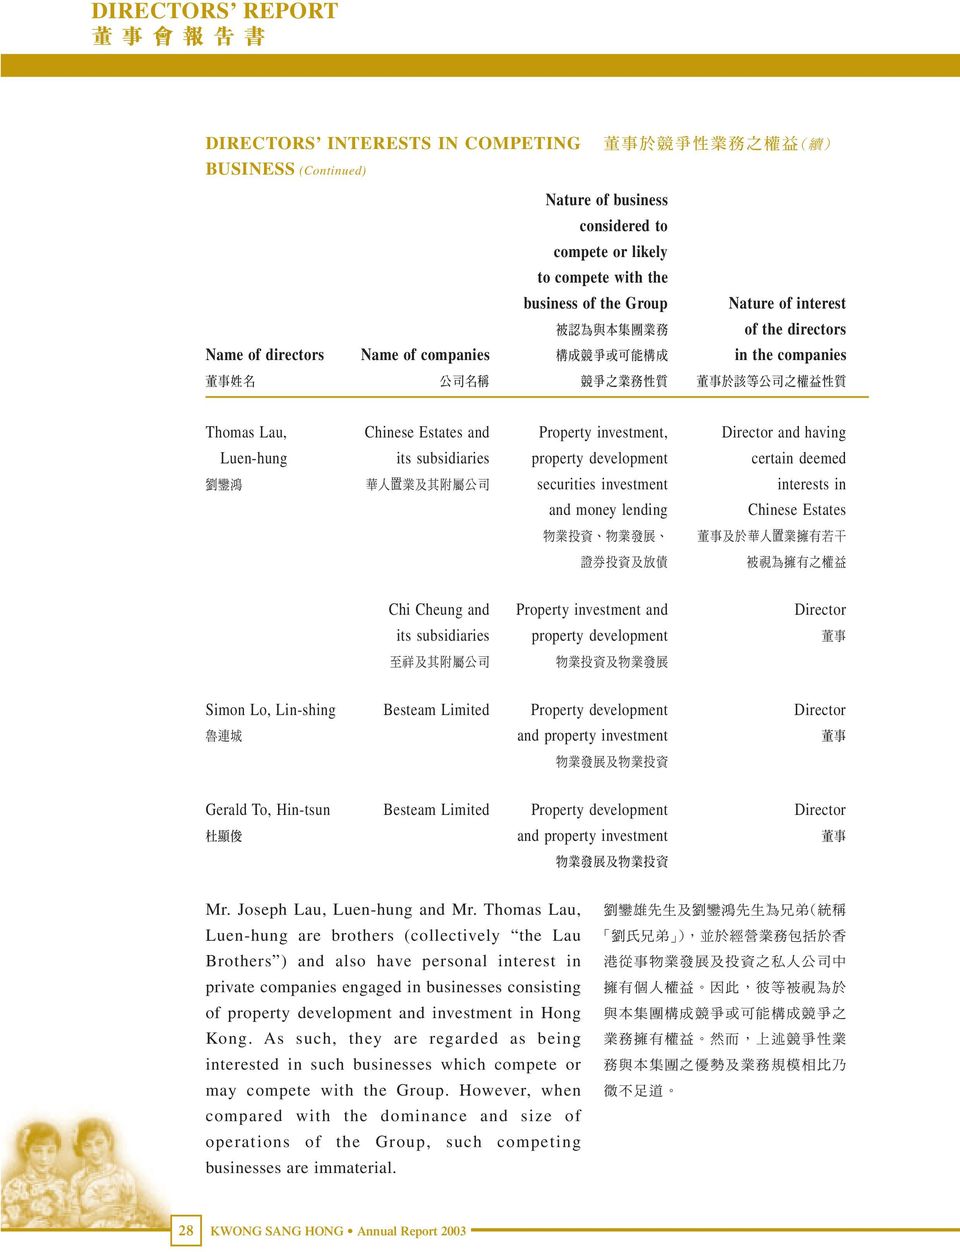 investment interests in and money lending Chinese Estates Chi Cheung and Property investment and Director its subsidiaries property development Simon Lo, Lin-shing Besteam Limited Property